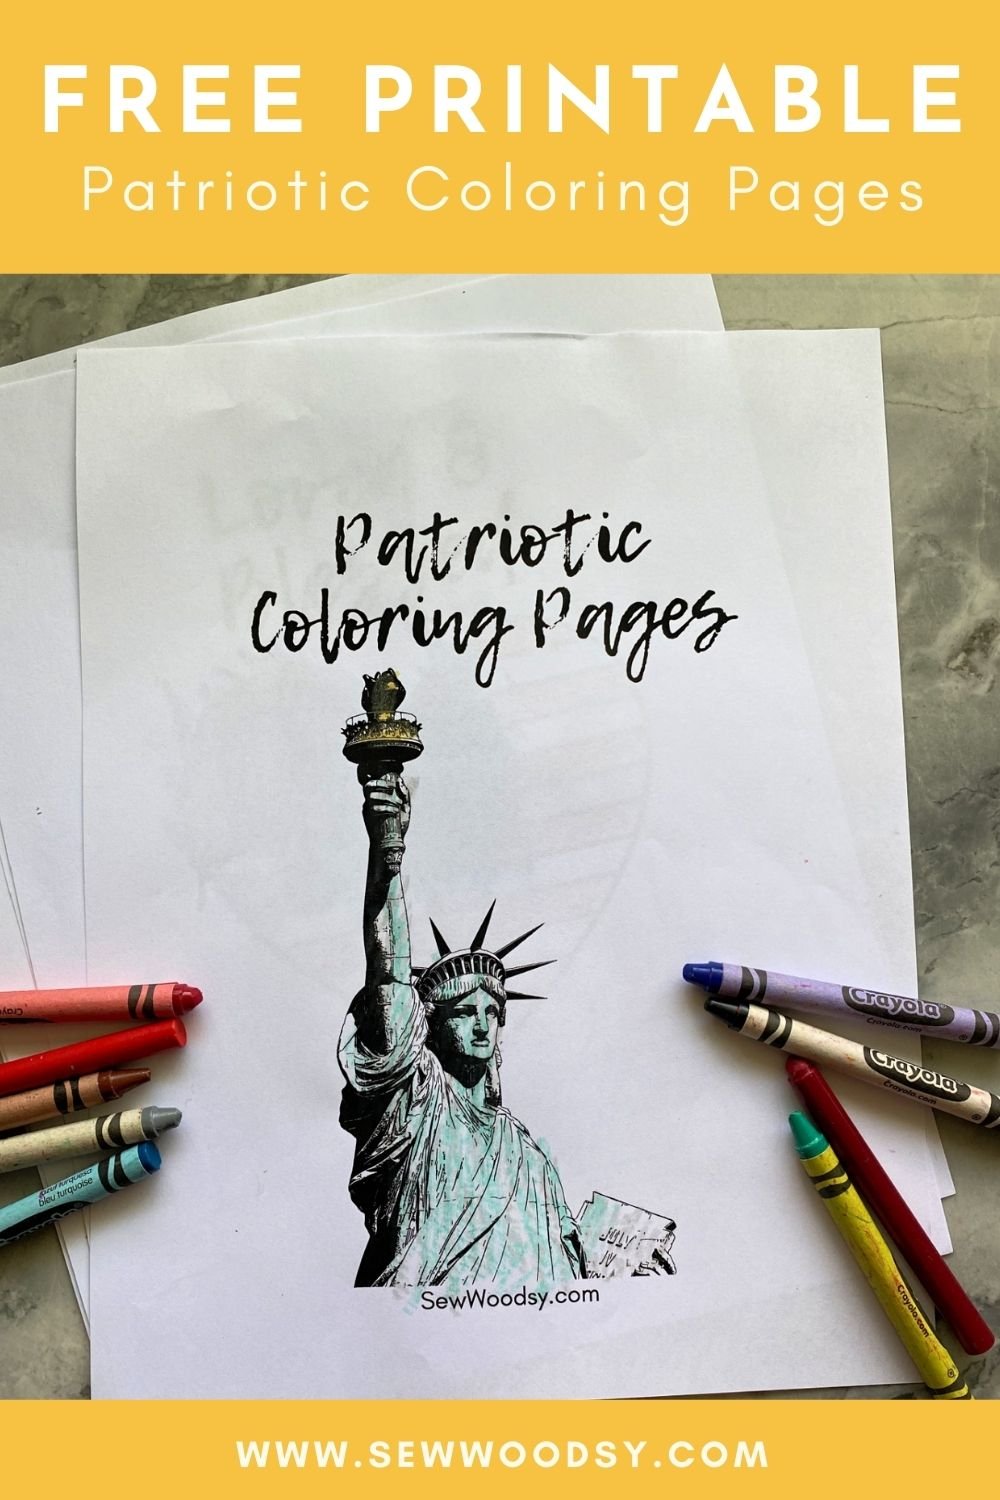 Top view of a stack of Patriotic Coloring Pages with title on phot for Pinterest.